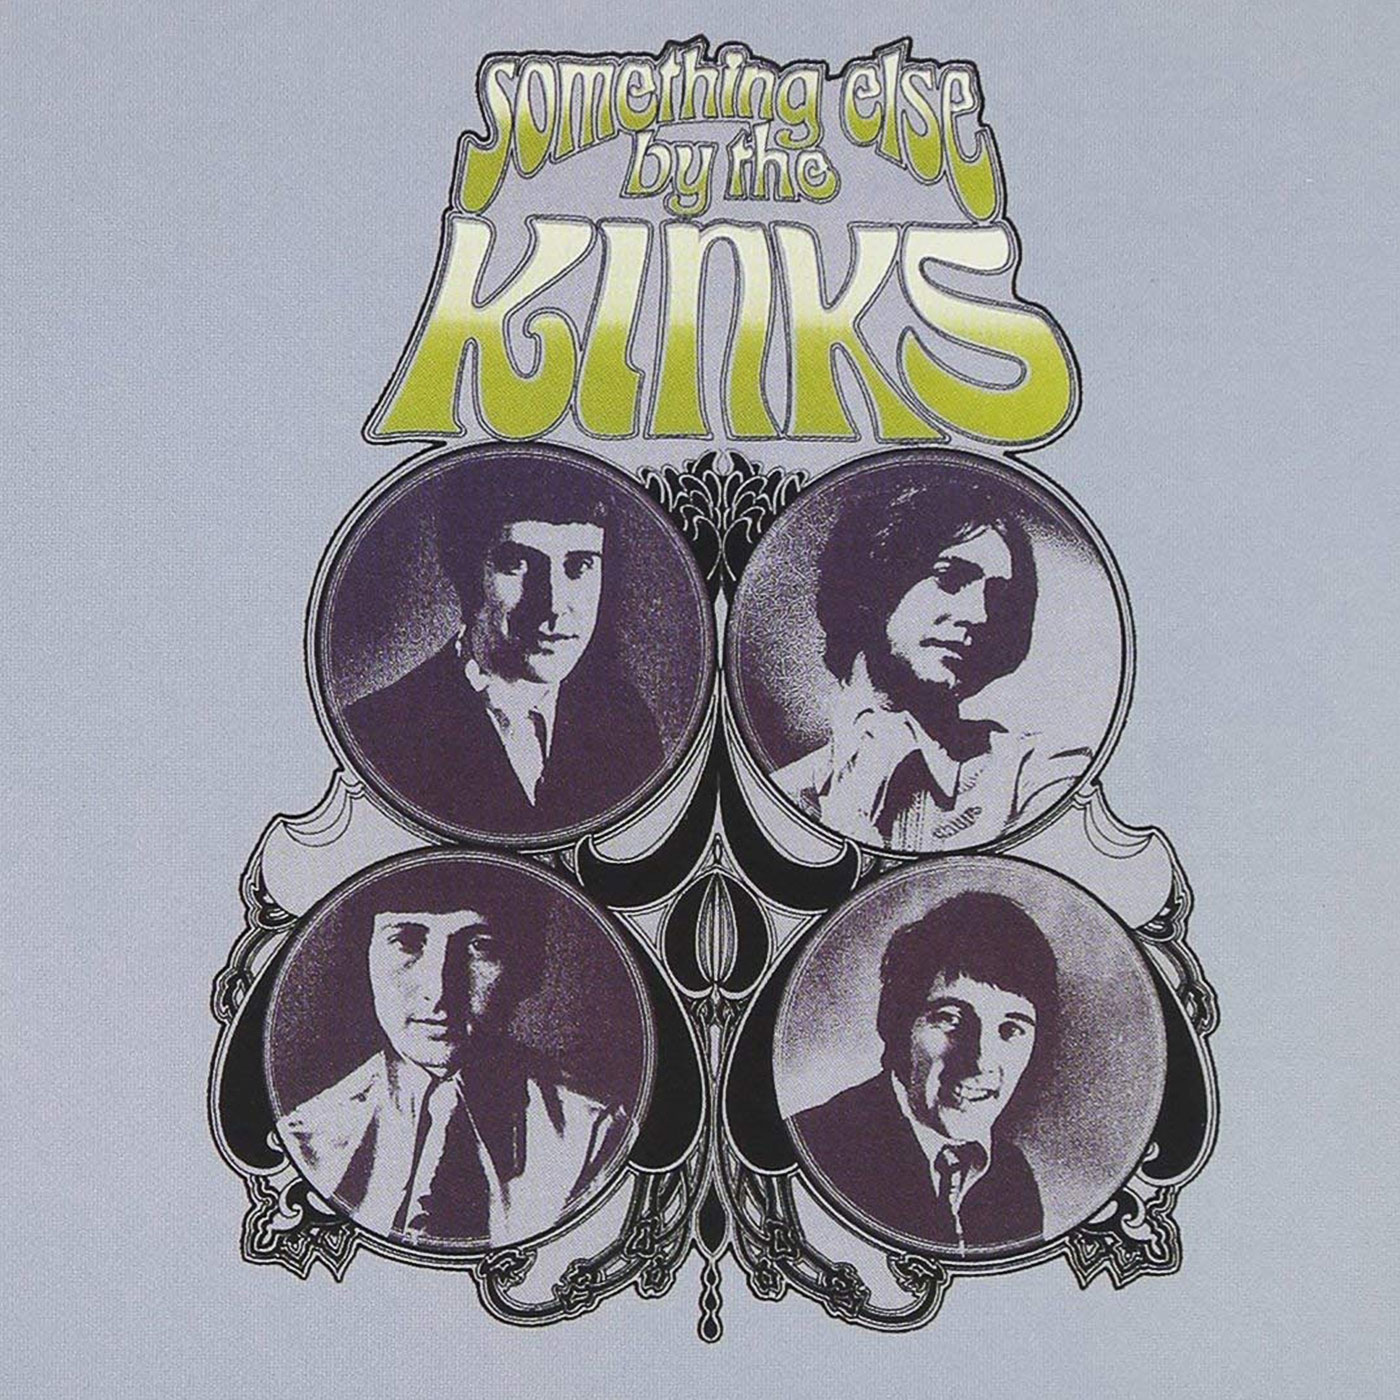 097 The Kinks – Something Else by the Kinks